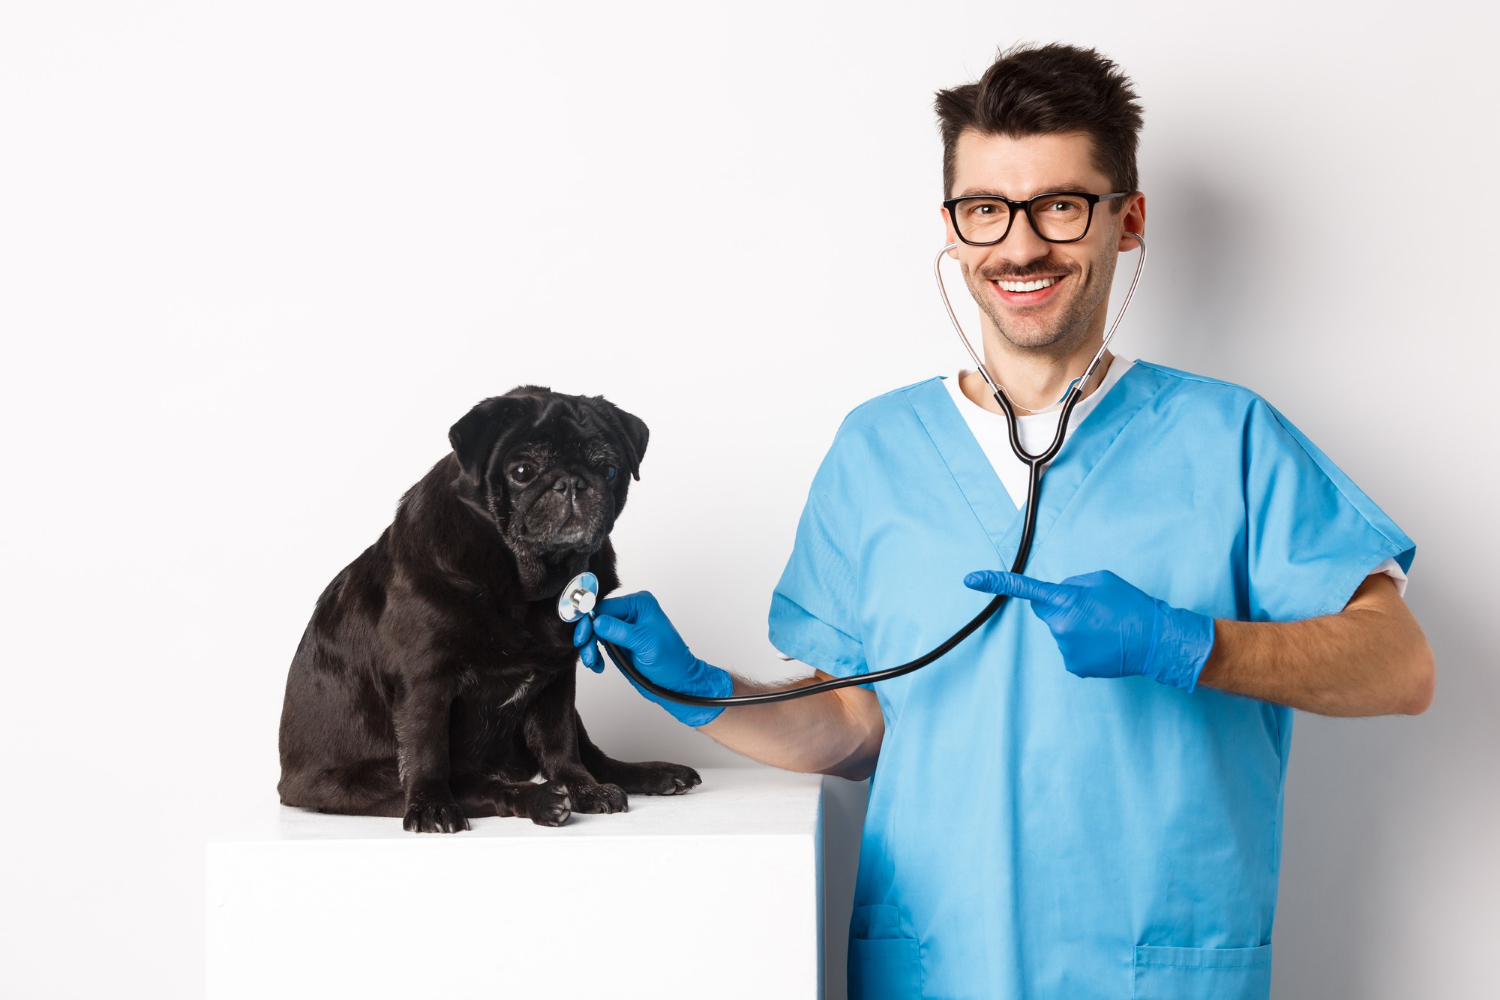 handsome-veterinarian-at-vet-clinic-examining-cute-black-pug-dog-pointing-finger-at-pet-during-check-up-with-stethoscope-white-background.jpg